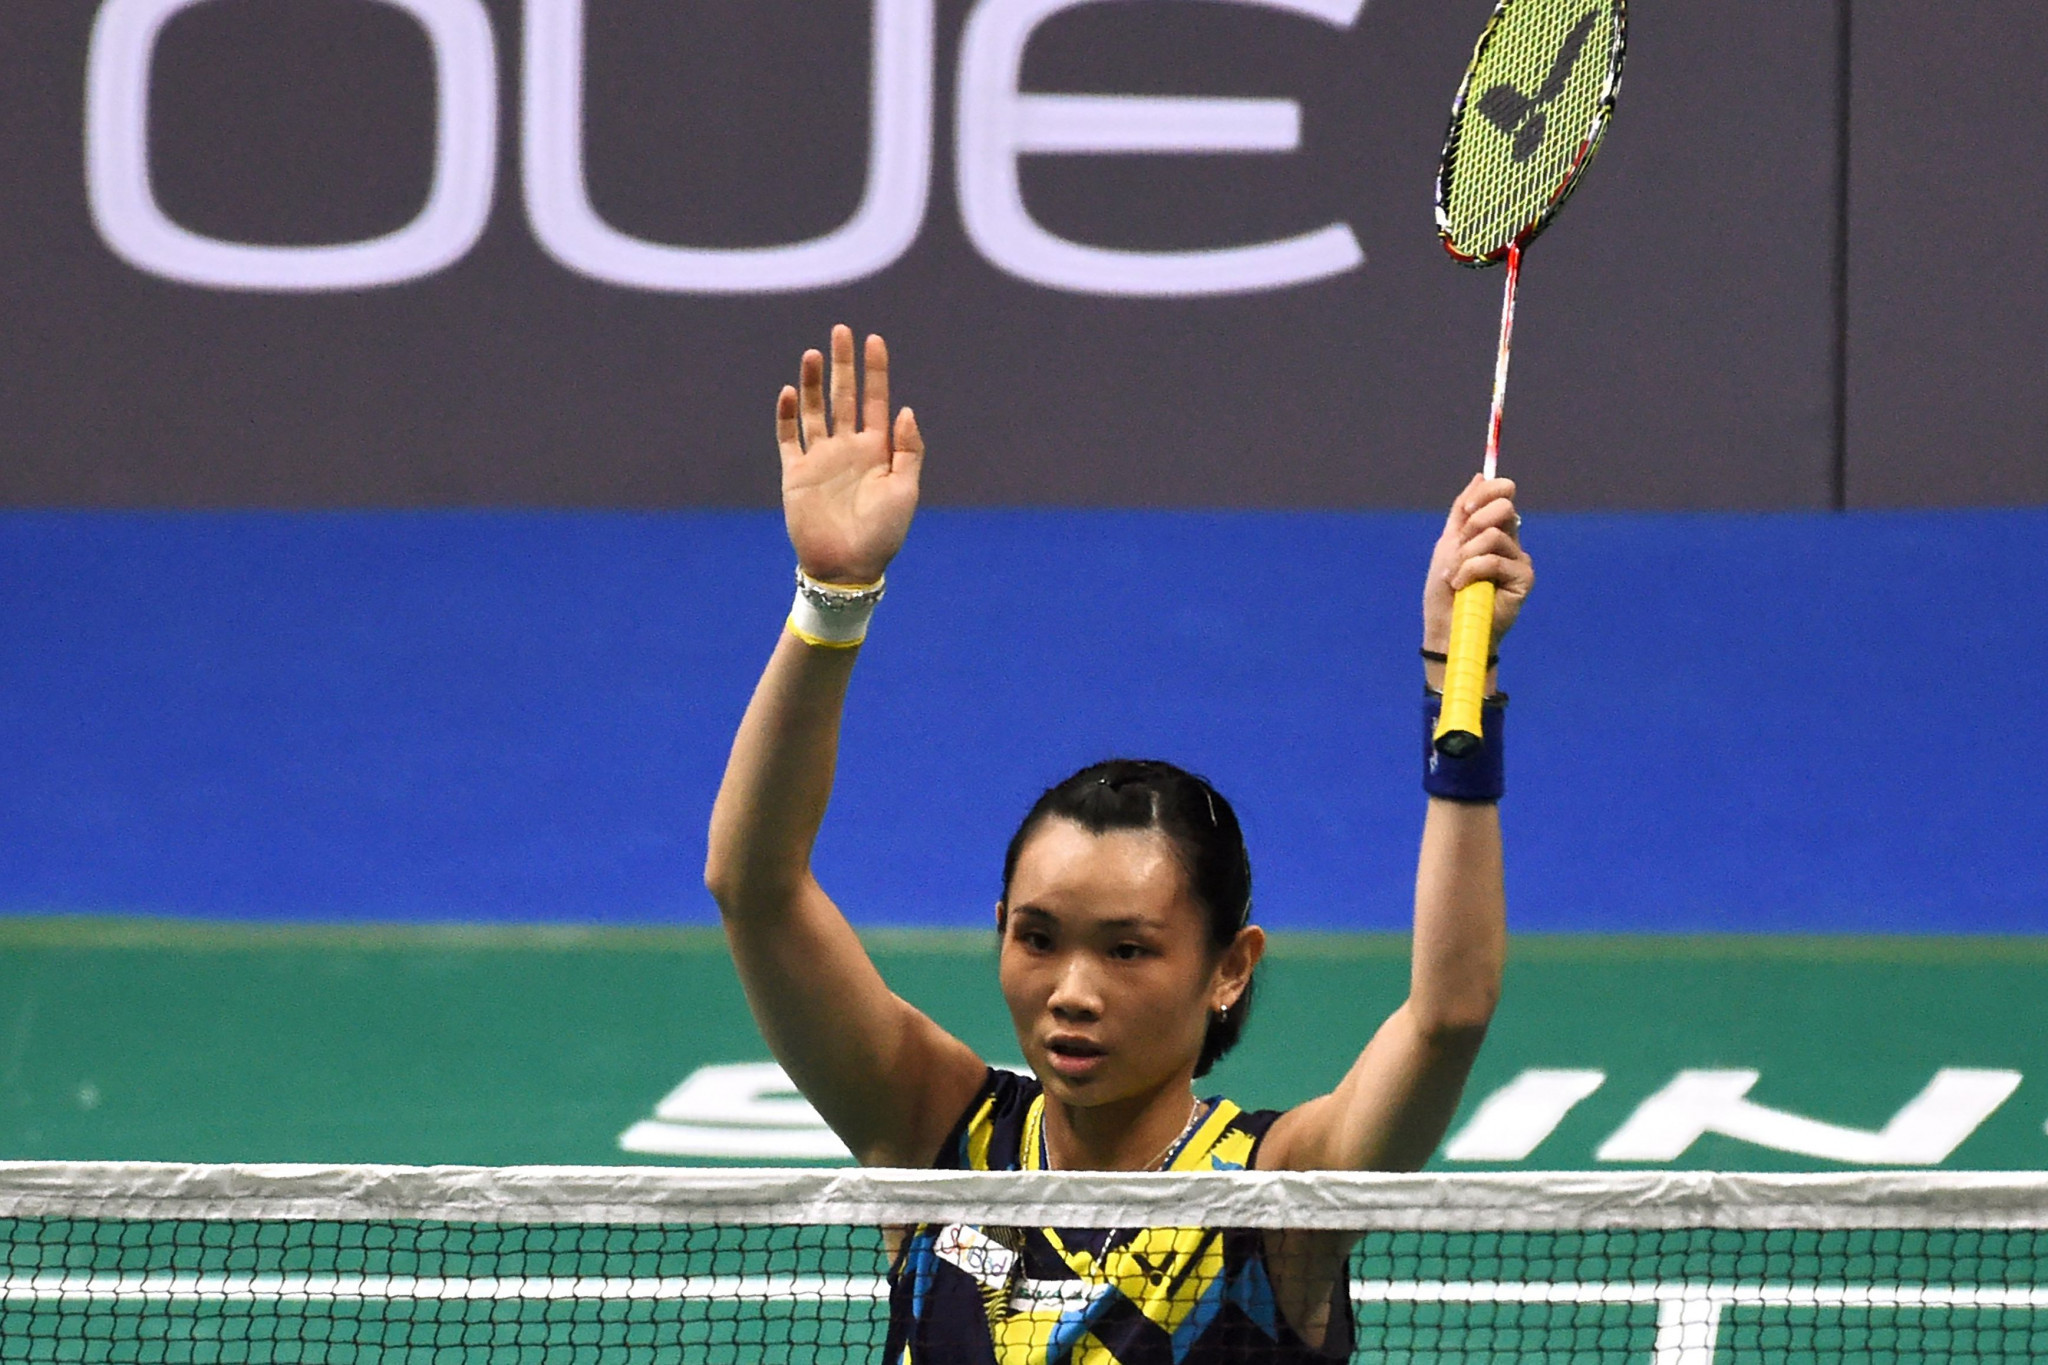 Tai overcomes former world number one on opening day of All England Open